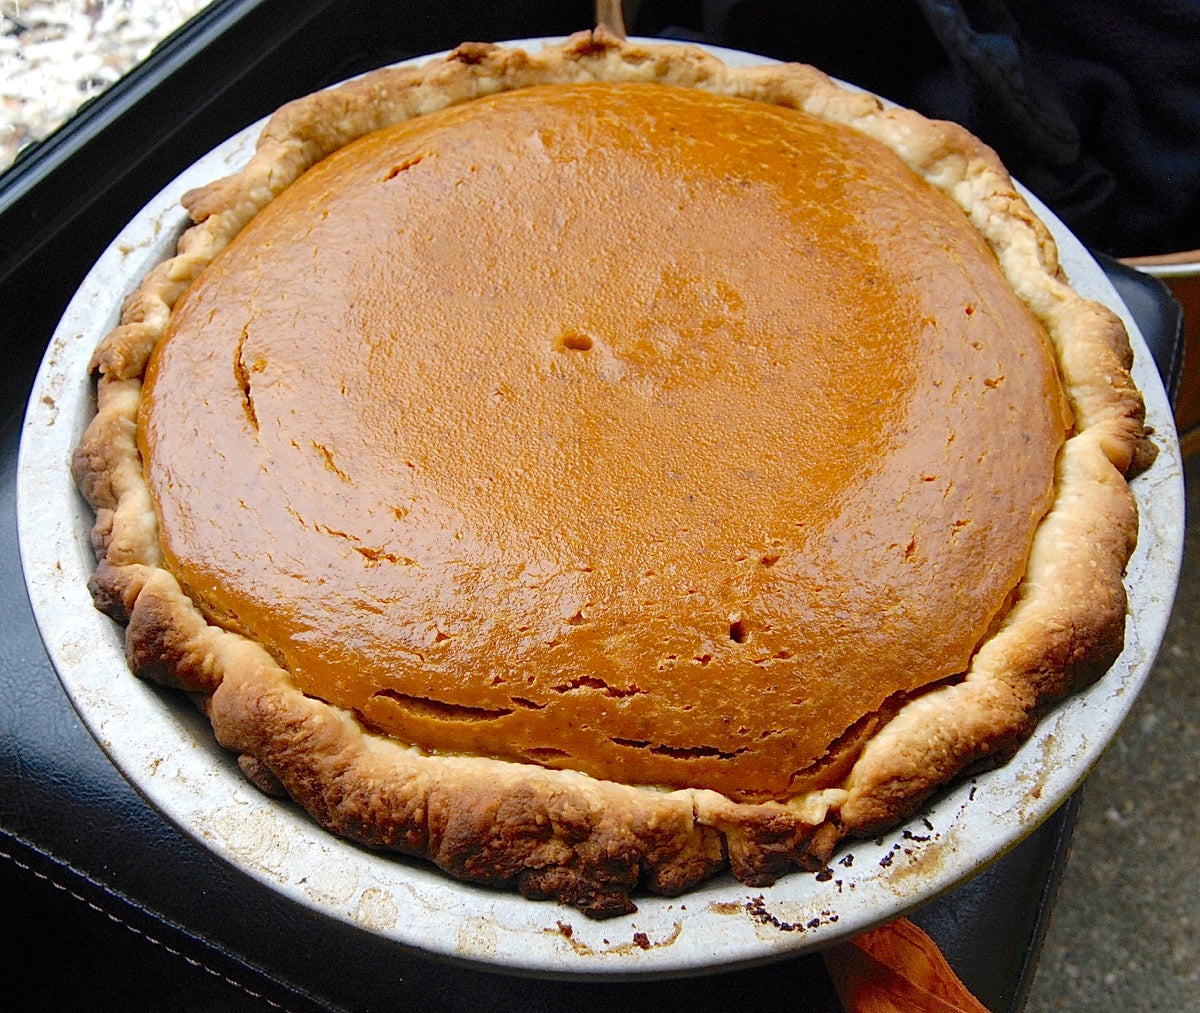 https://www.kingarthurbaking.com/sites/default/files/blog-images/2017/11/How-to-keep-pumpkin-pie-from-cracking-6.jpg